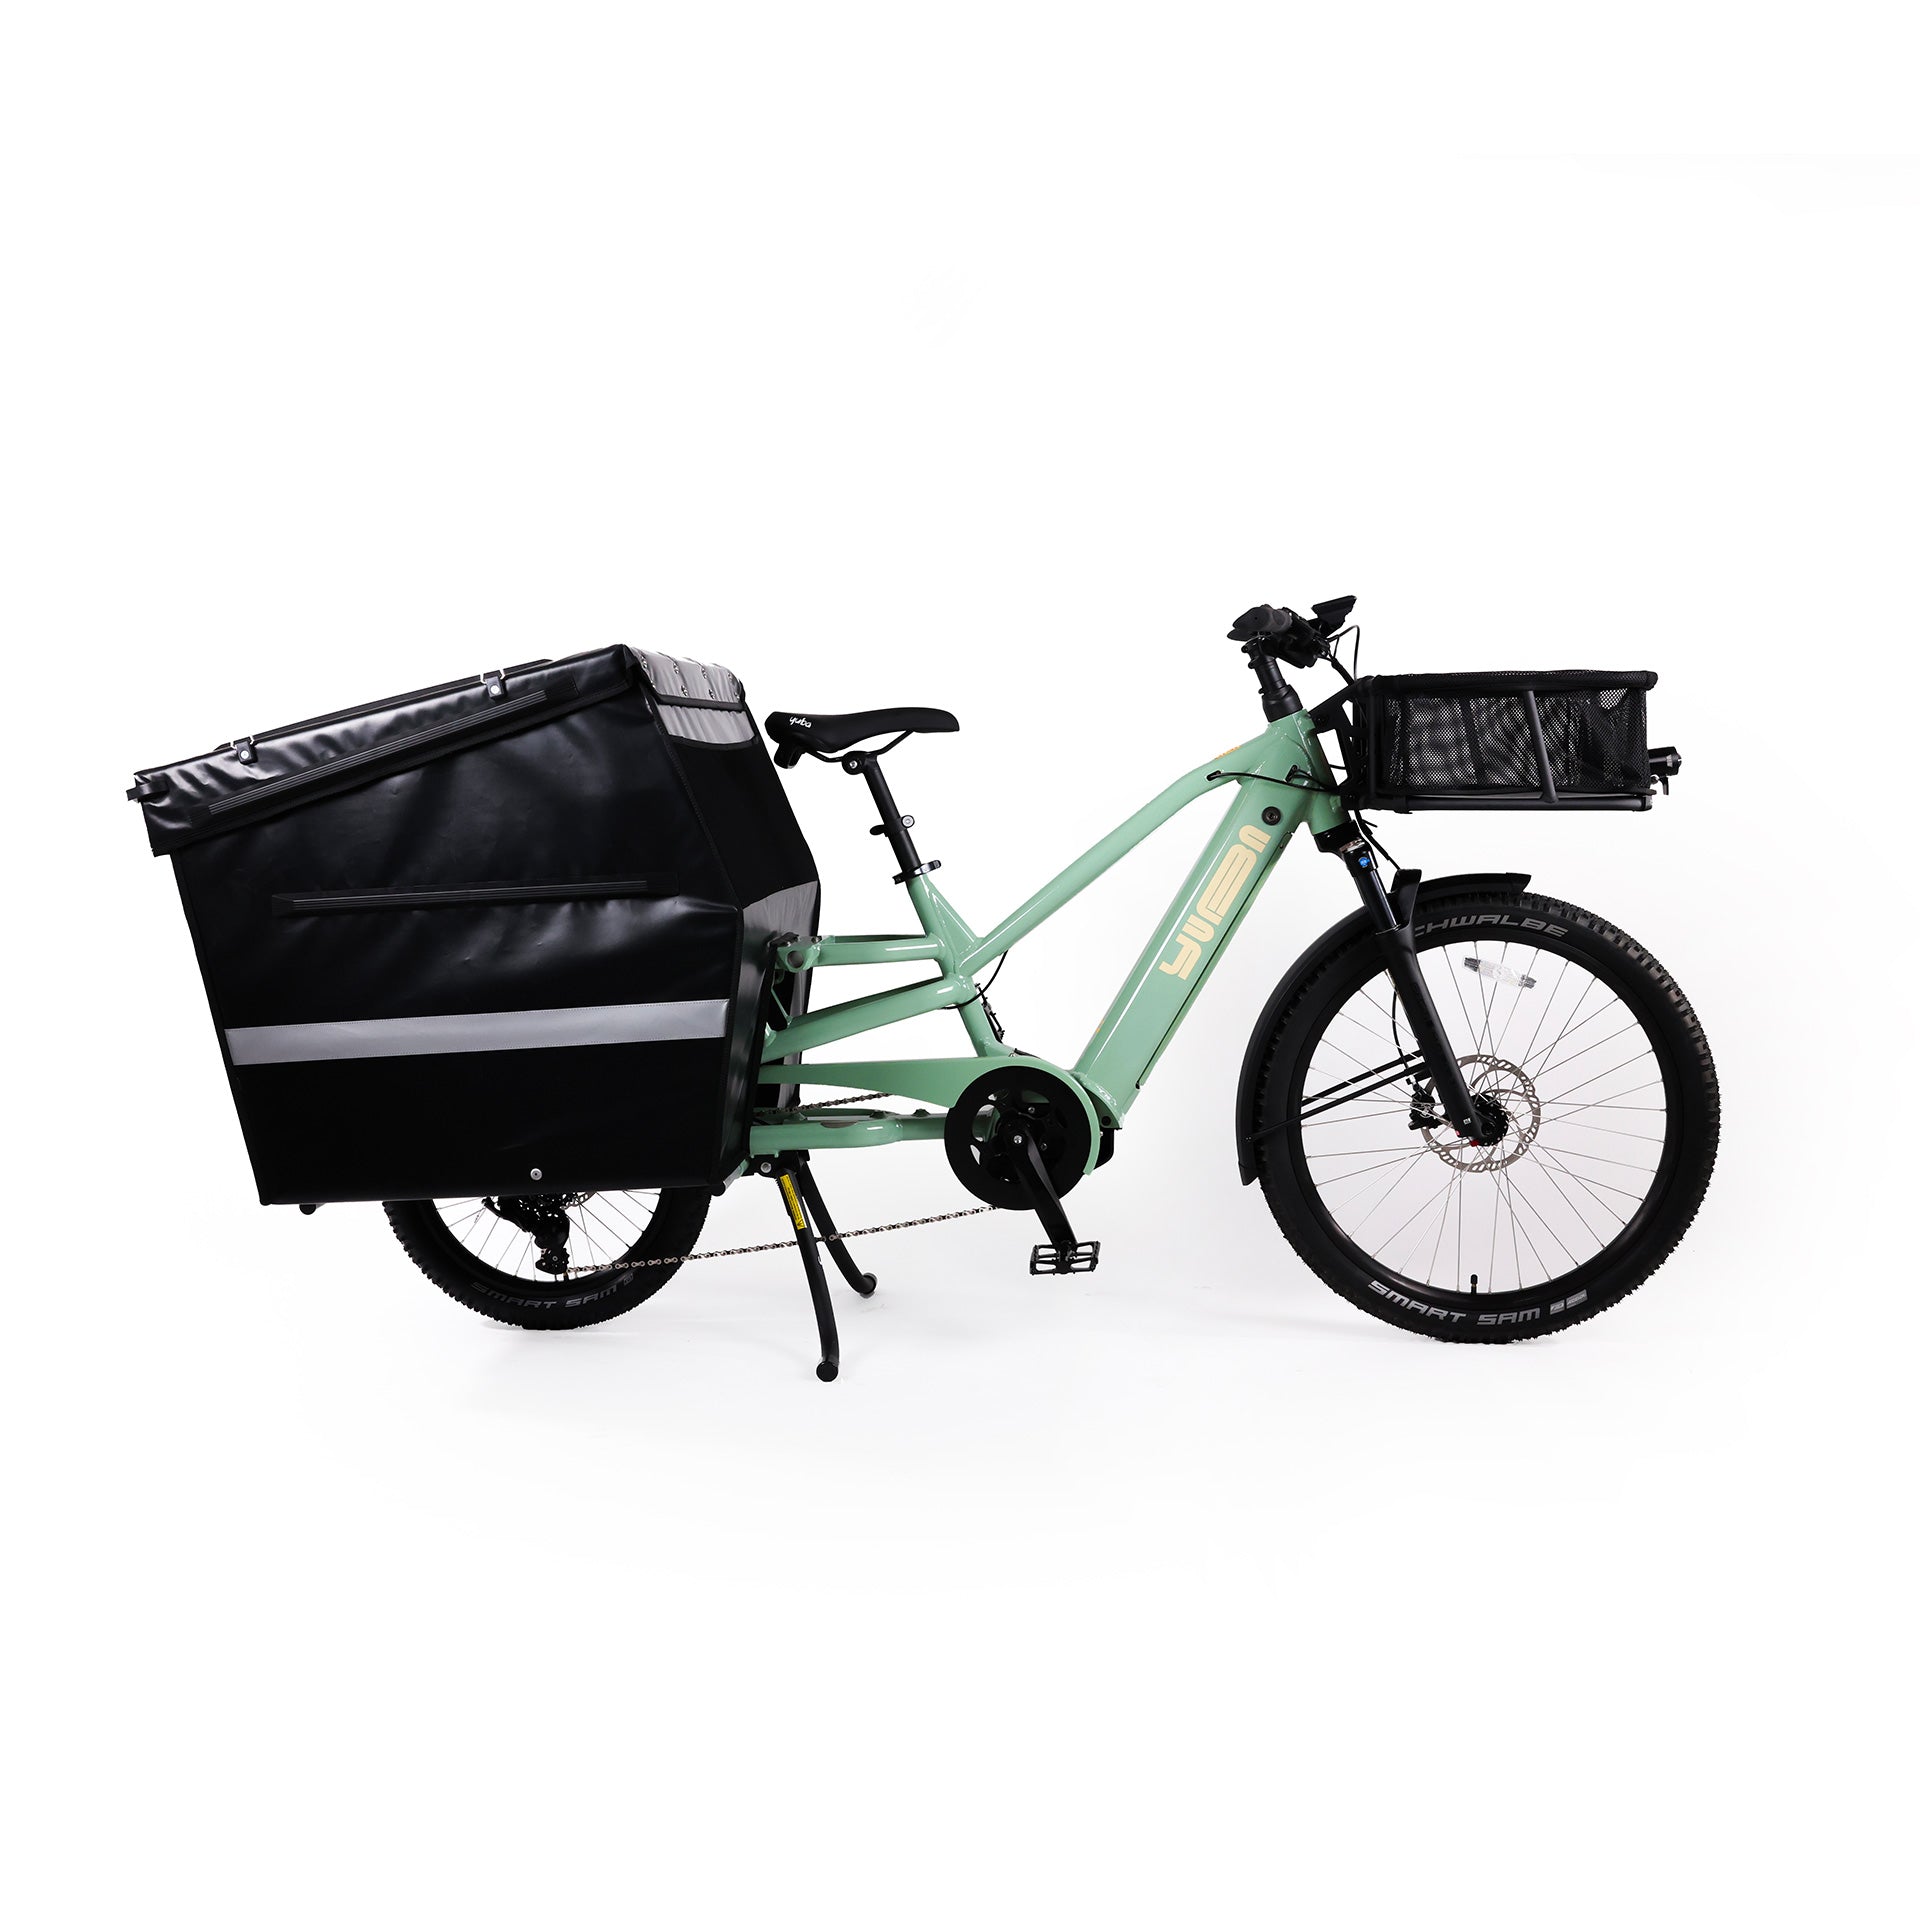 A product image of the Yuba Spicy Curry V4 electric longtail cargo bike. The frame colour is Lunar and the bike is set up with the Professional Box add-on on the rear and a bread basket on the front.